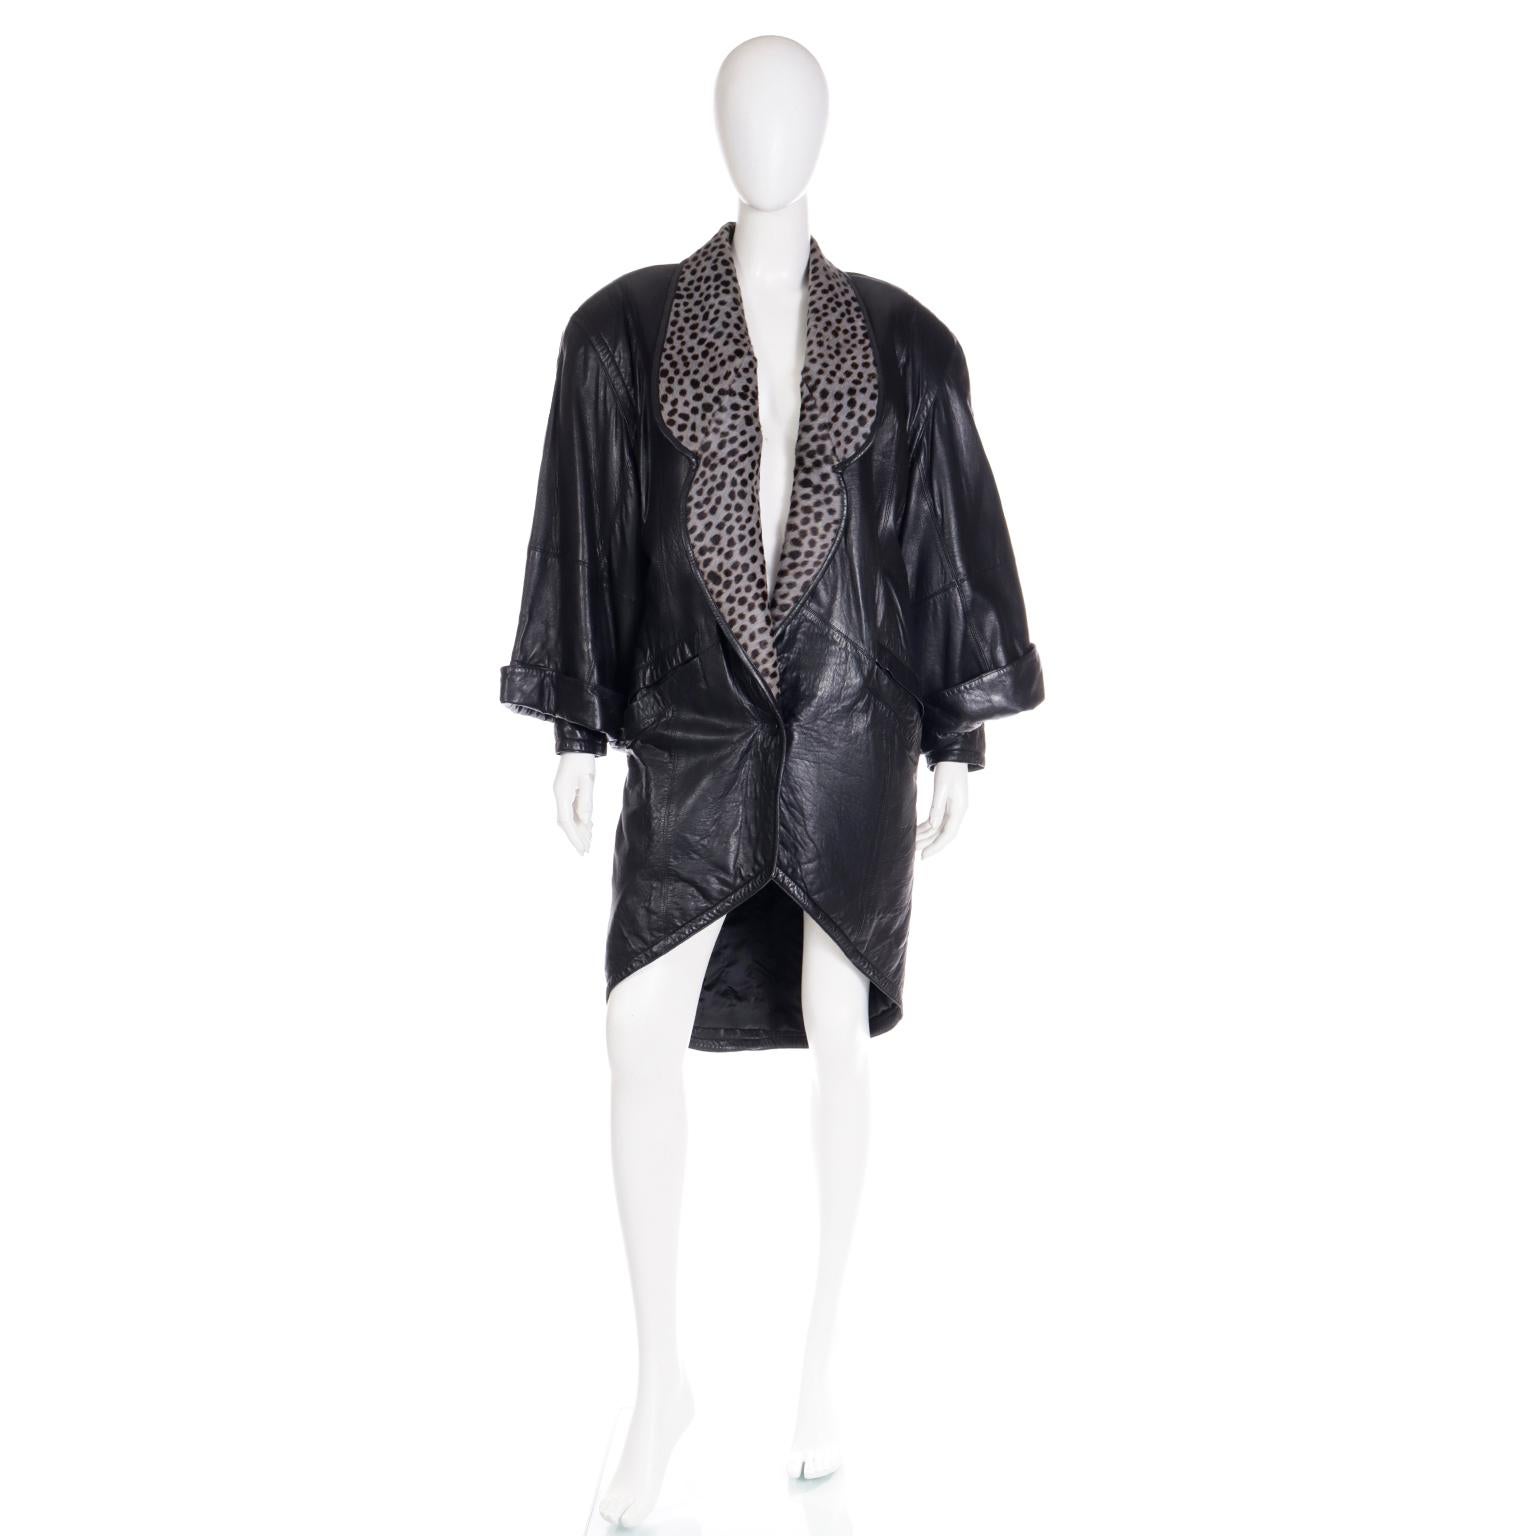 This fabulous vintage 1980's Marc Buchanan Pelle Pelle coat reminded us so much of some vintage Claude Montana pieces we have sold in the past. The black leather coat has so many unique details that really make it so exceptional! The cut is